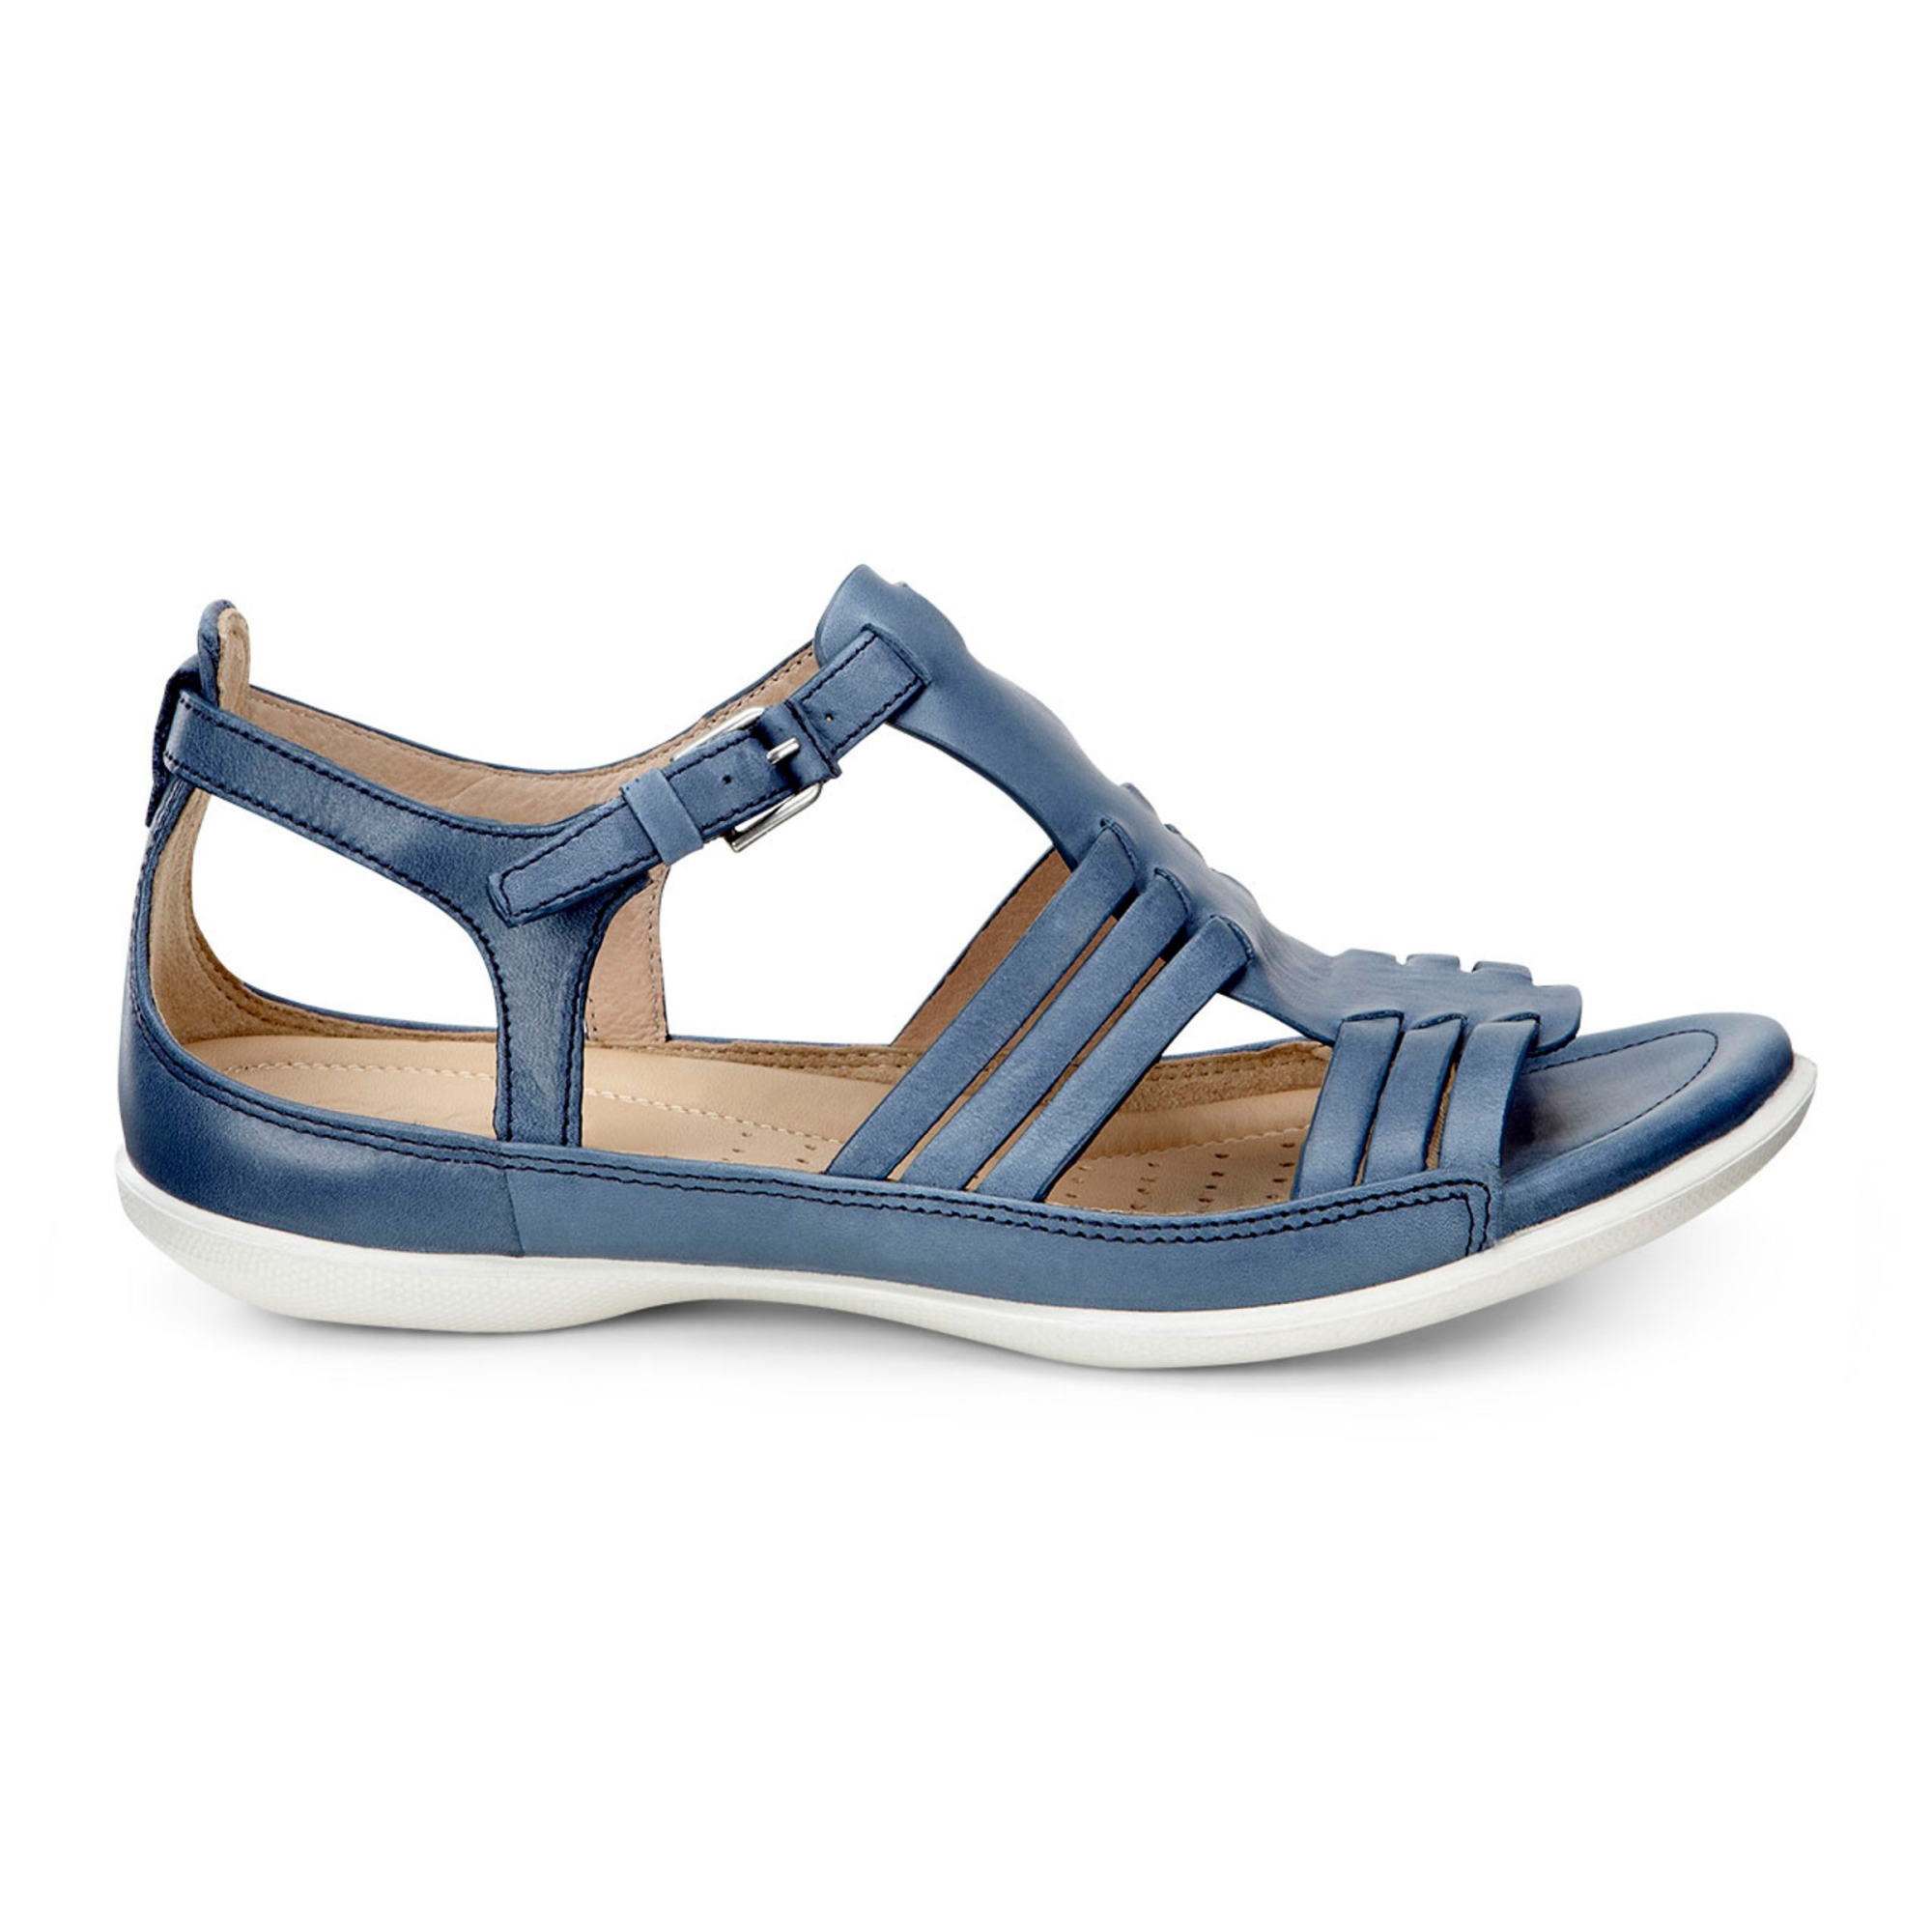 Ecco Flash Huarache Sandal - Products - Veryk Mall - Veryk many product, quick response, safe your money!